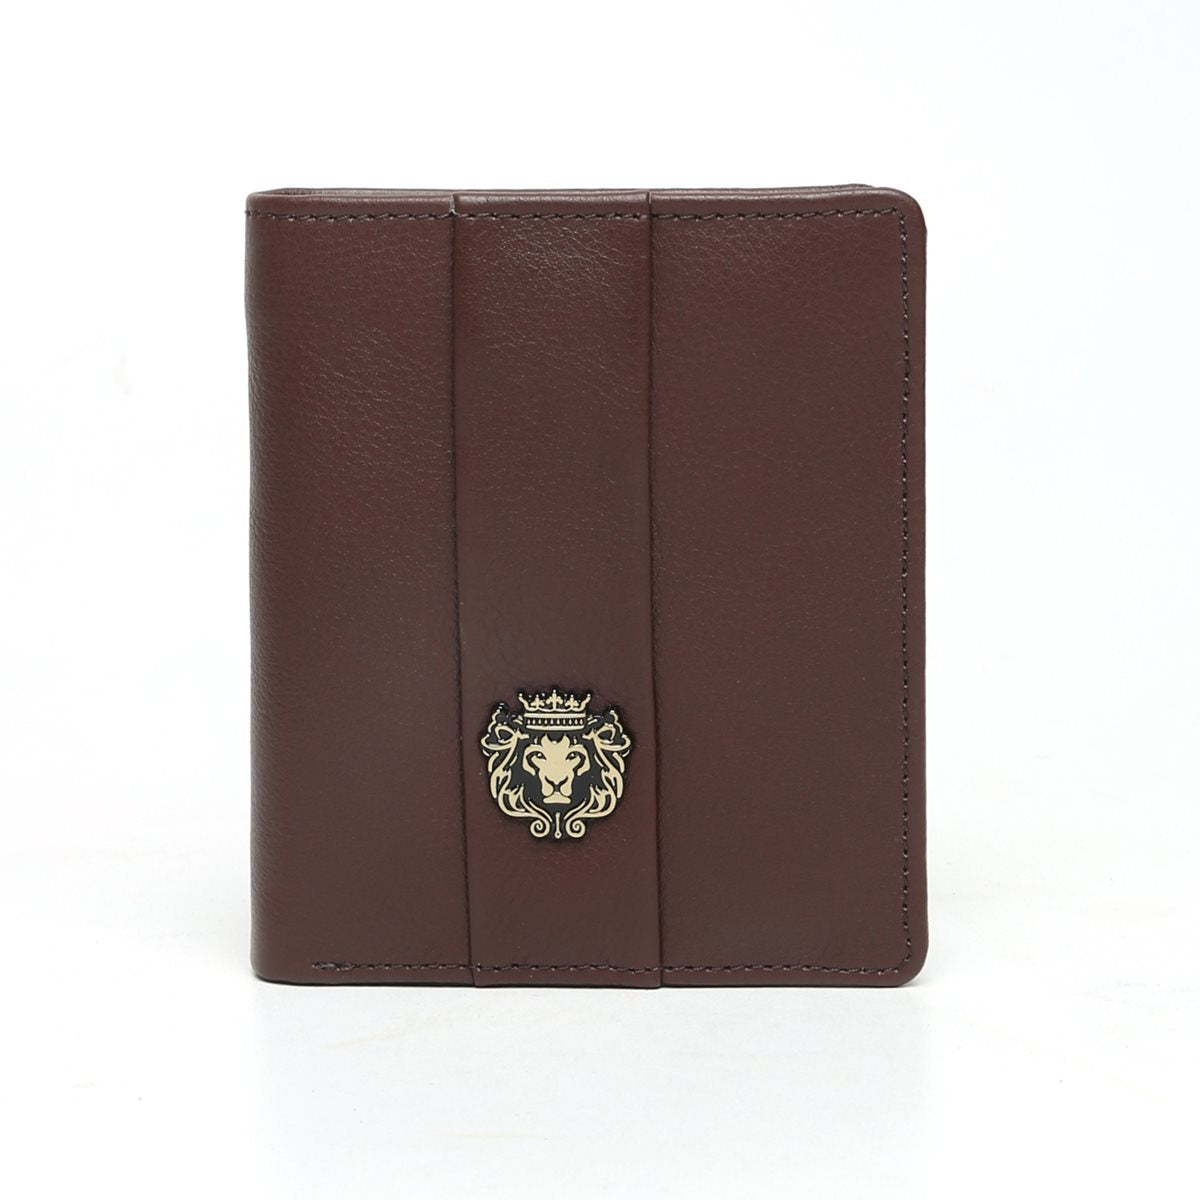 Brown passport holder with metal lion logo and wallet+ cards slots in one .